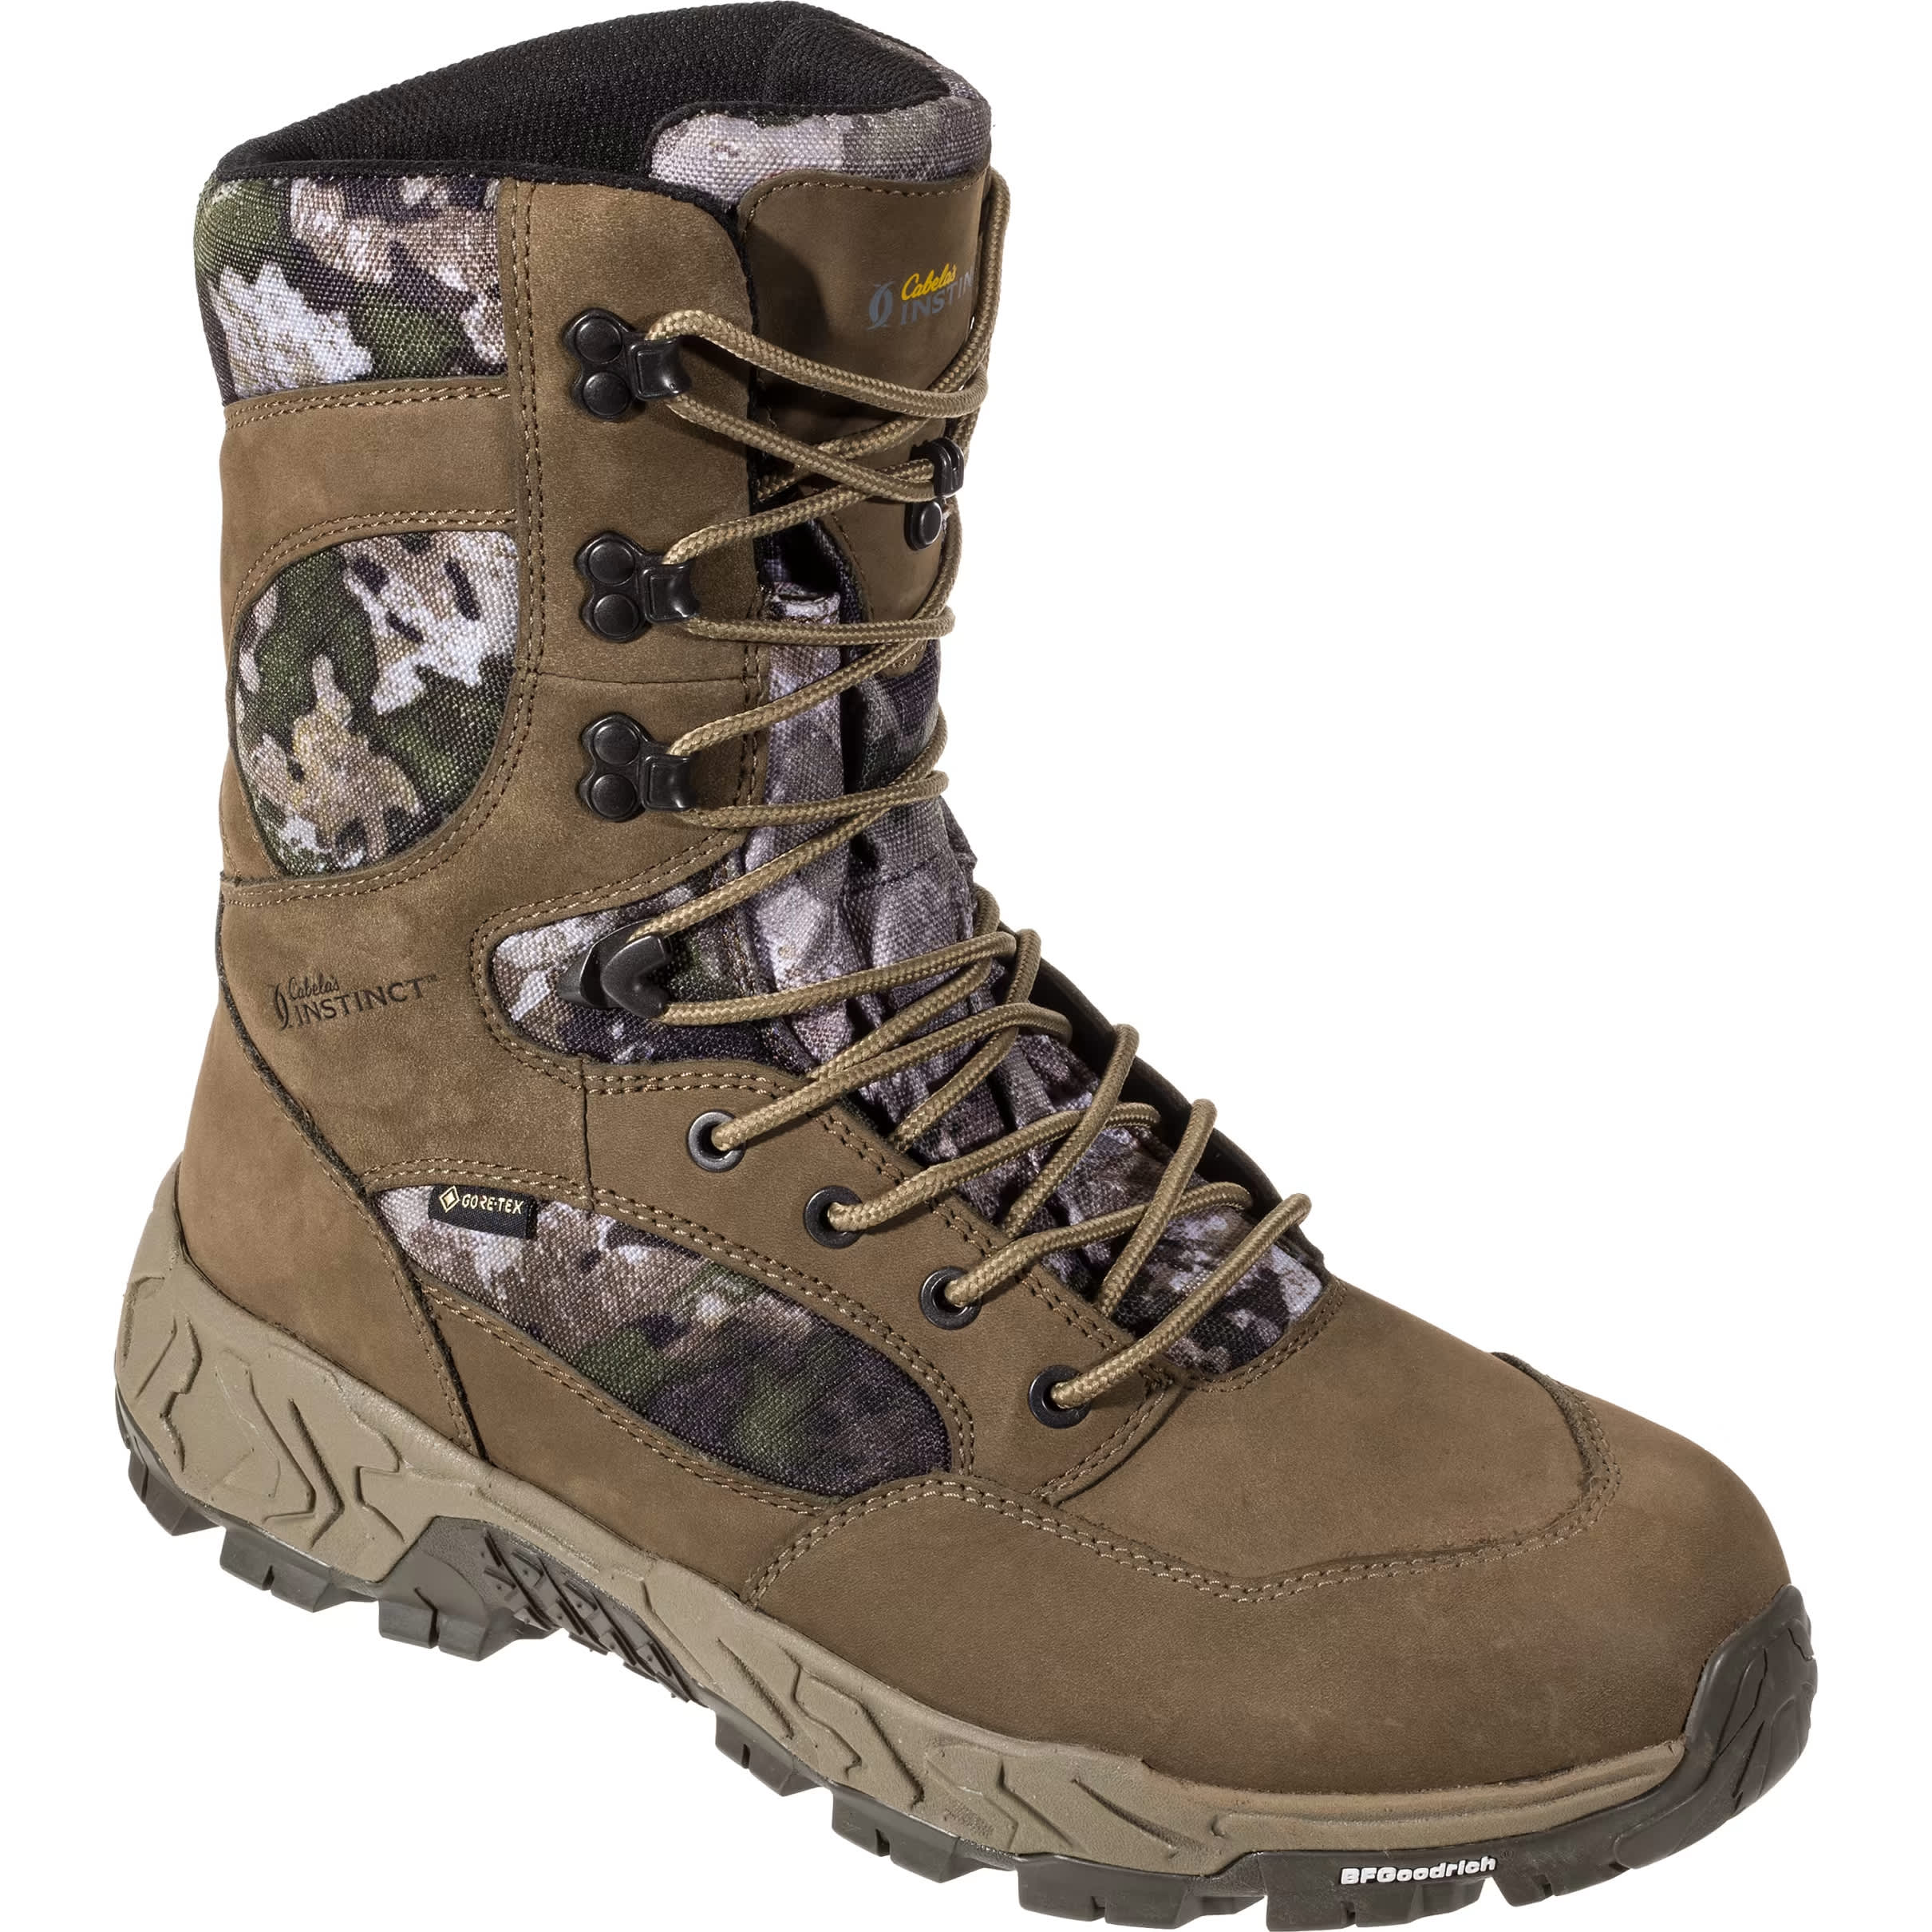 Cabela’s Men’s Instinct Credence GORE-TEX® Insulated Hunting Boots